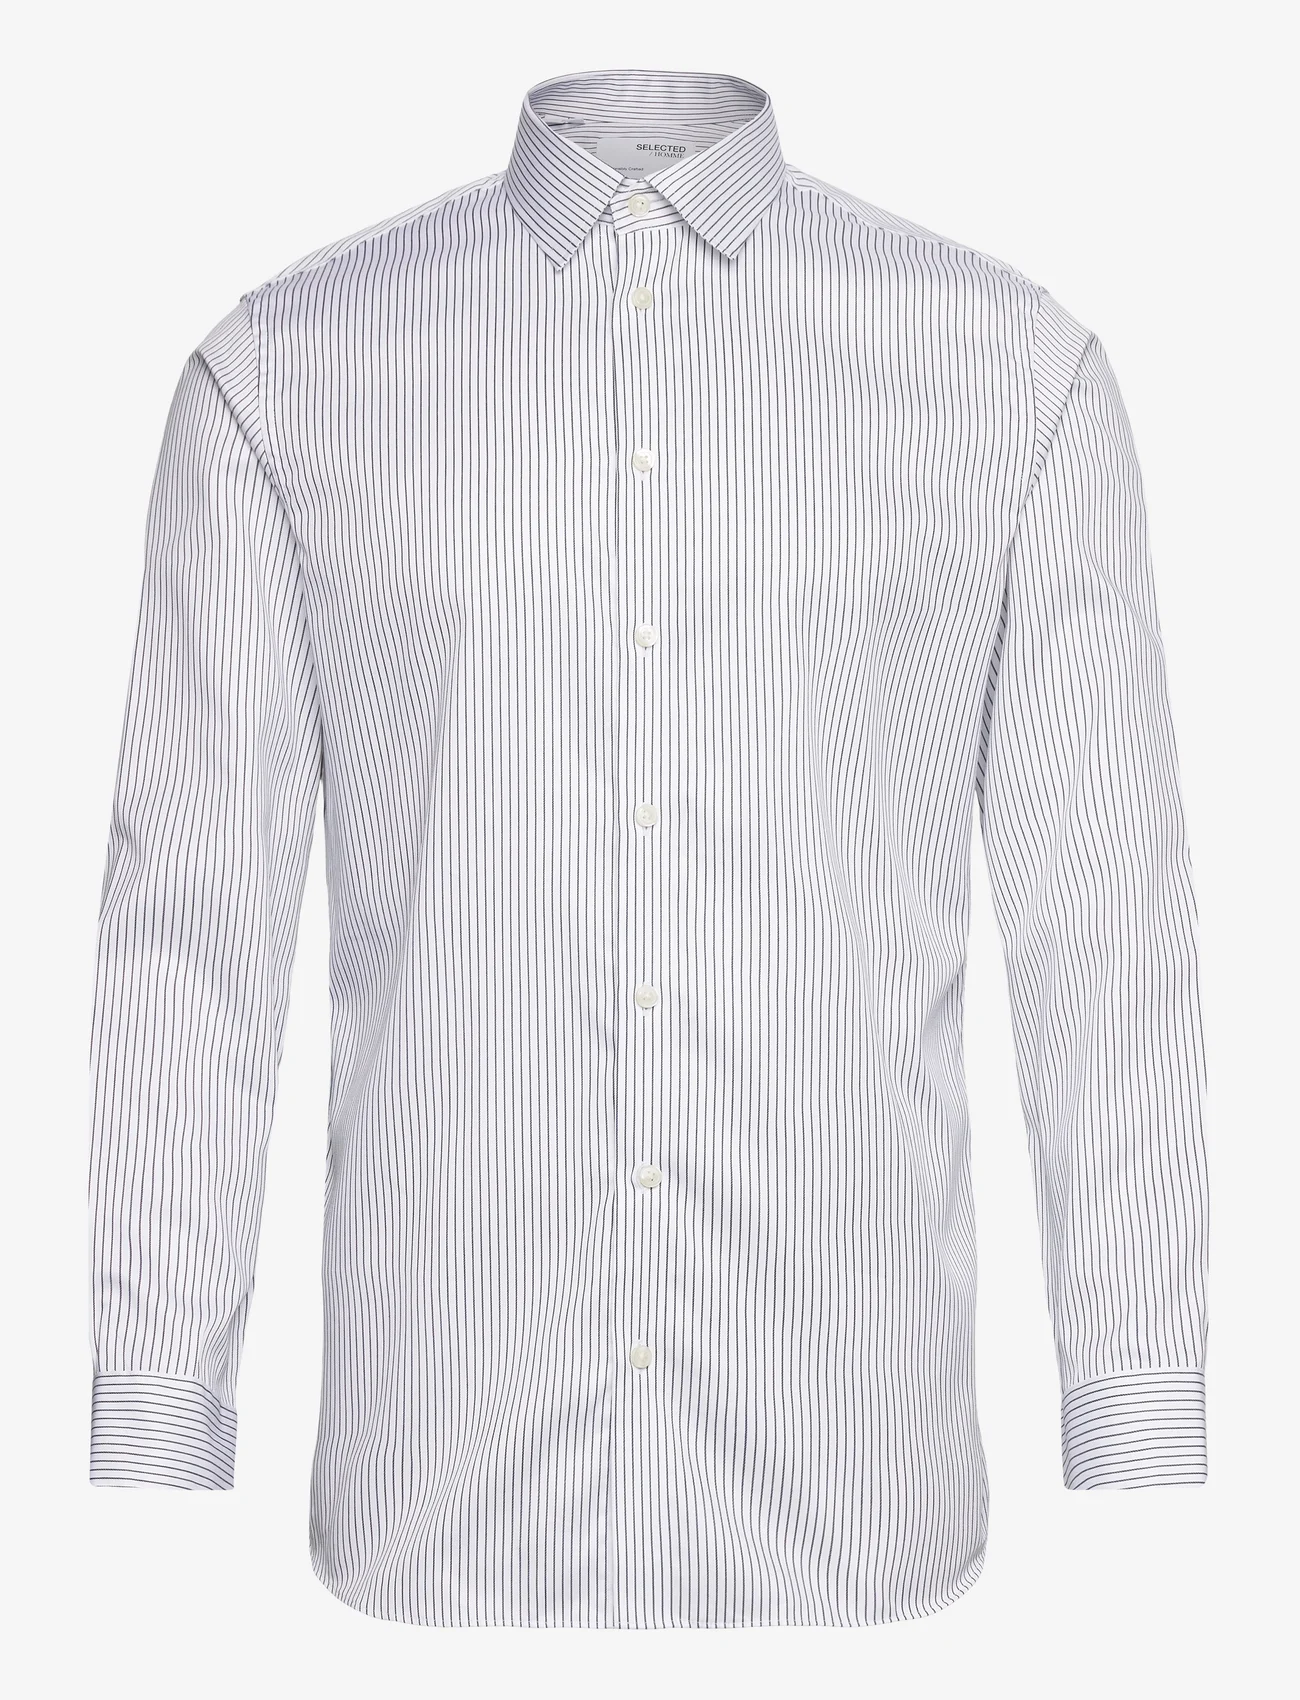 Selected Homme - SLHSLIMETHAN SHIRT LS CLASSIC NOOS - basic shirts - bright white - 0